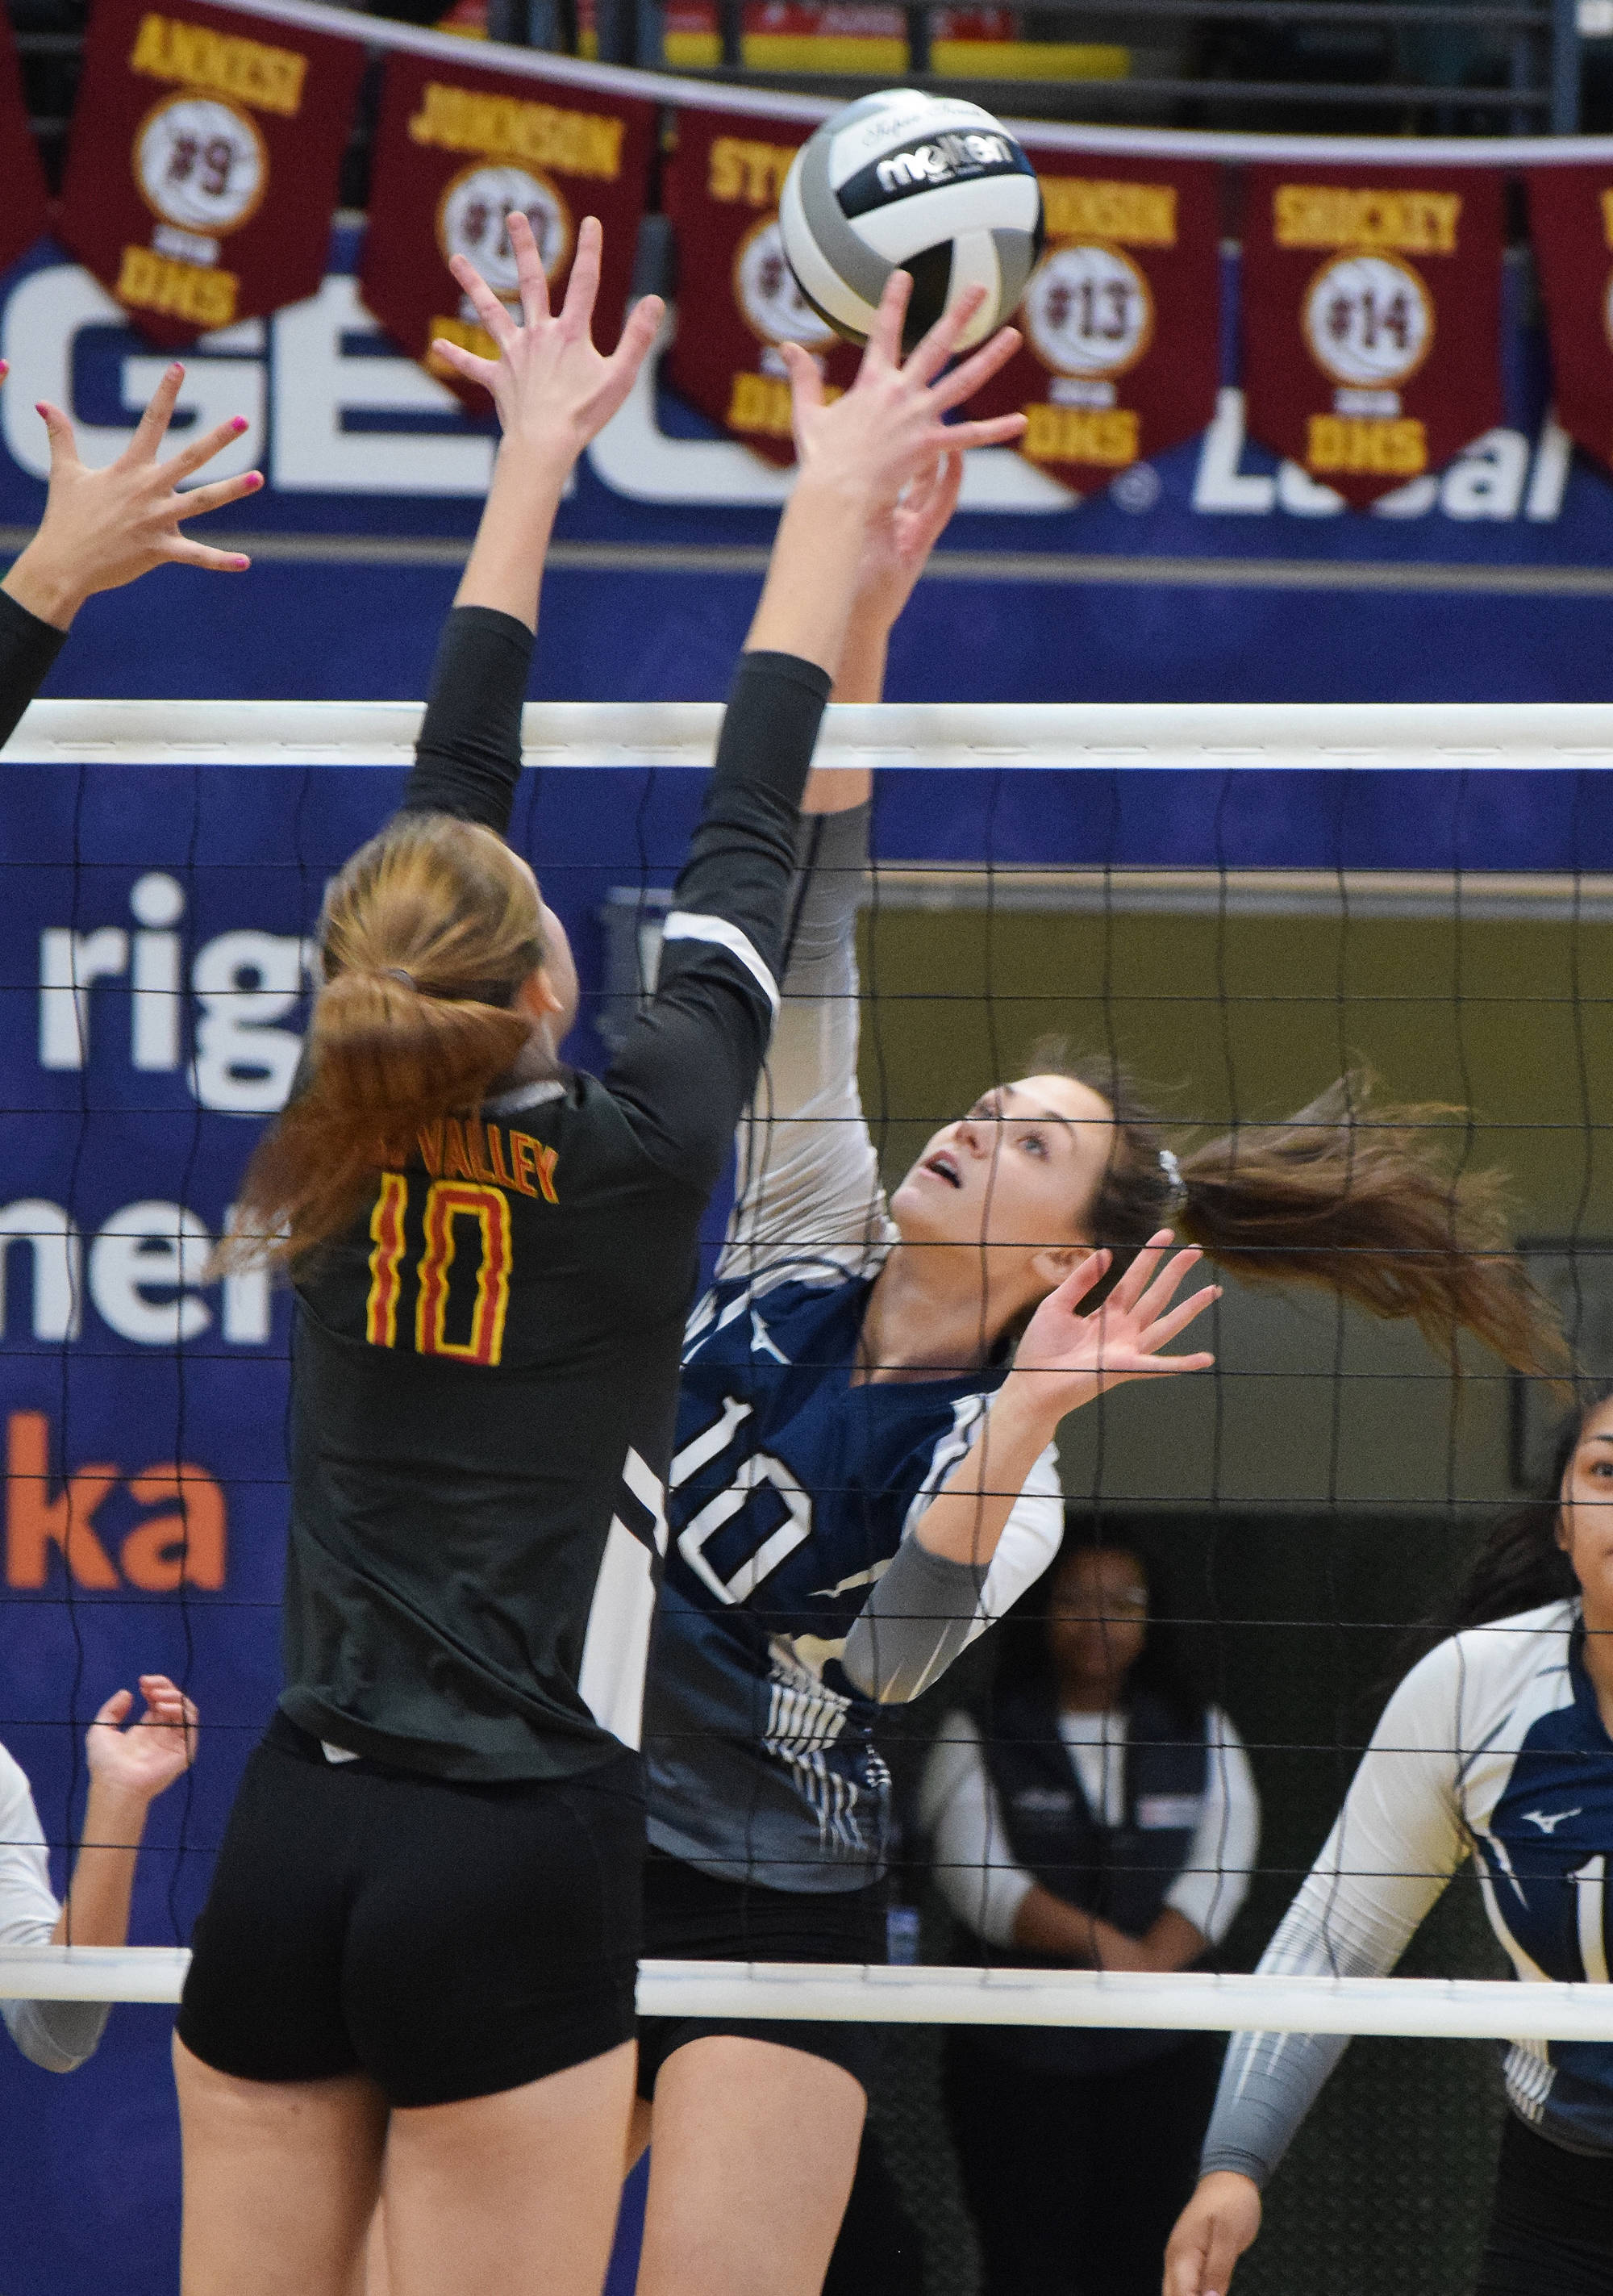 Soldotna’s Aliann Schmidt works against a block put up by West Valley’s Sonia McGaffigan (10) Thursday at the Class 4A state volleyball tournament at the Alaska Airlines Center. (Photo by Joey Klecka/Peninsula Clarion)